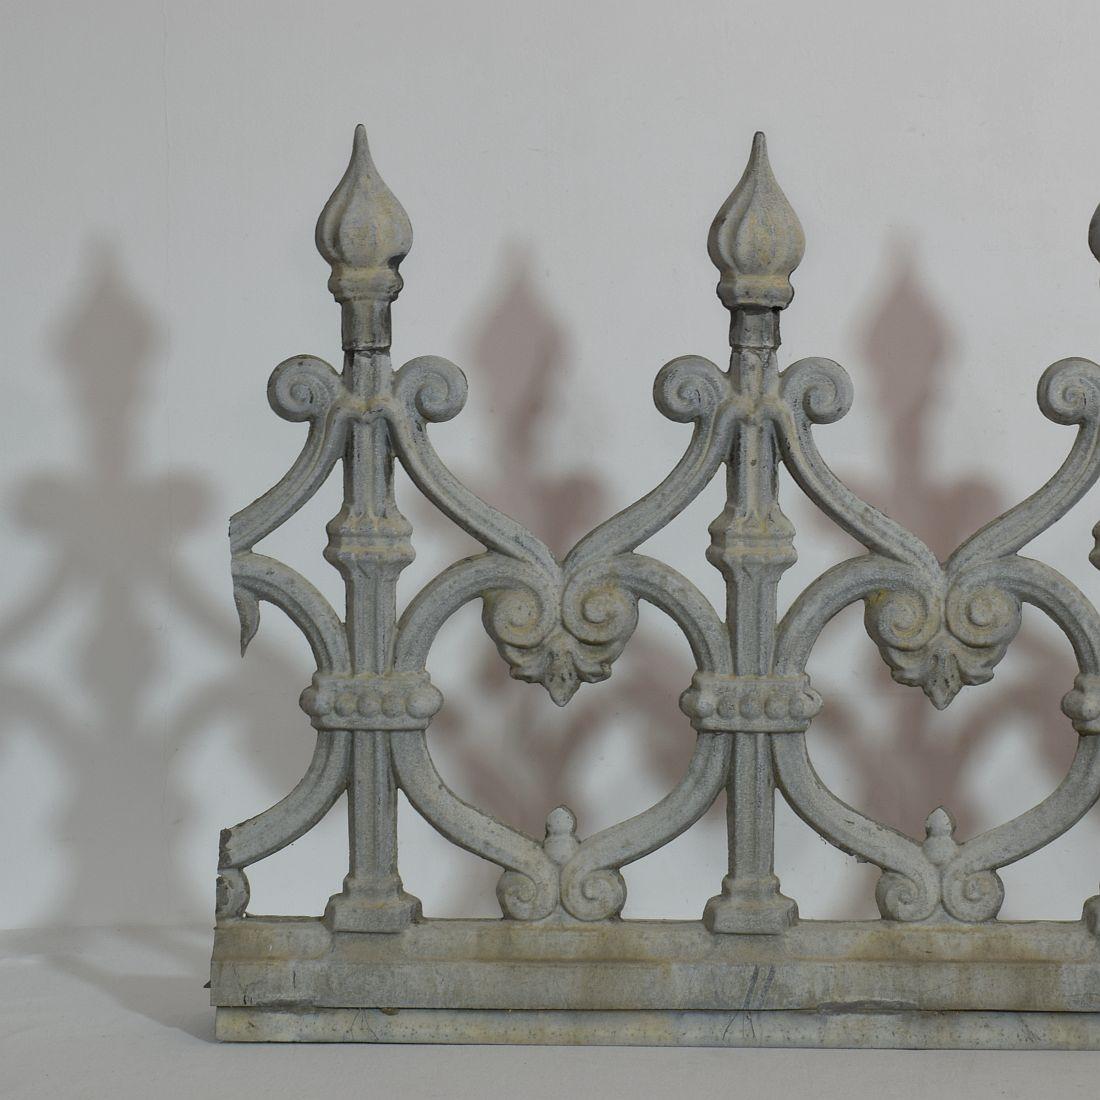 Pair of 19th Century French Zinc Architectural Roof Ornaments or Finials 12